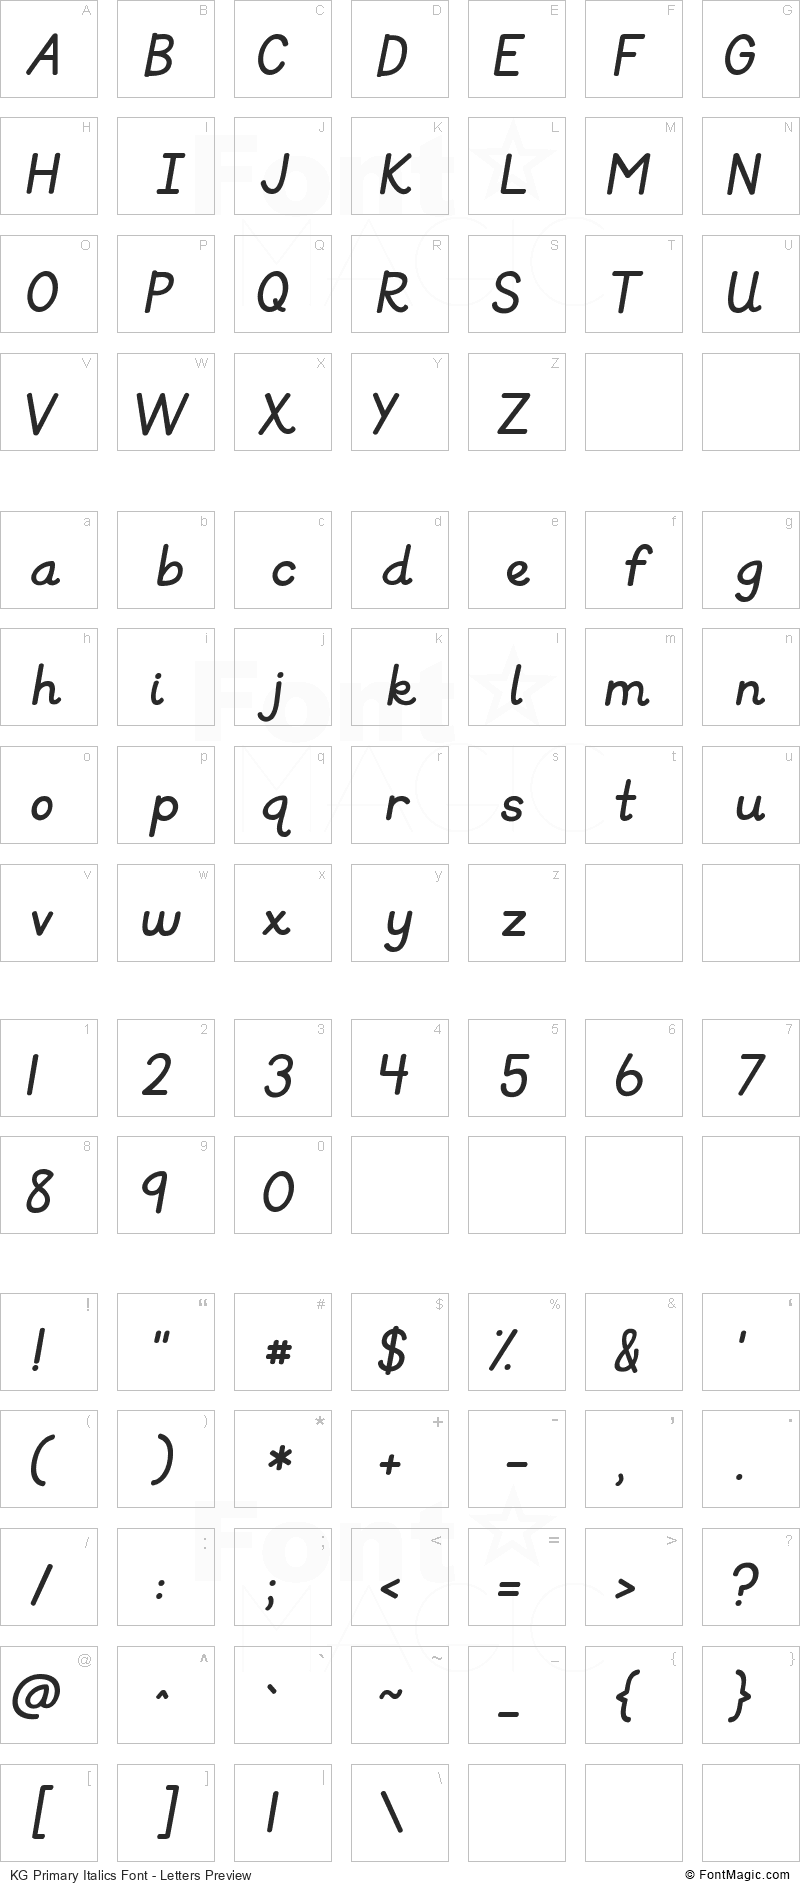 KG Primary Italics Font - All Latters Preview Chart